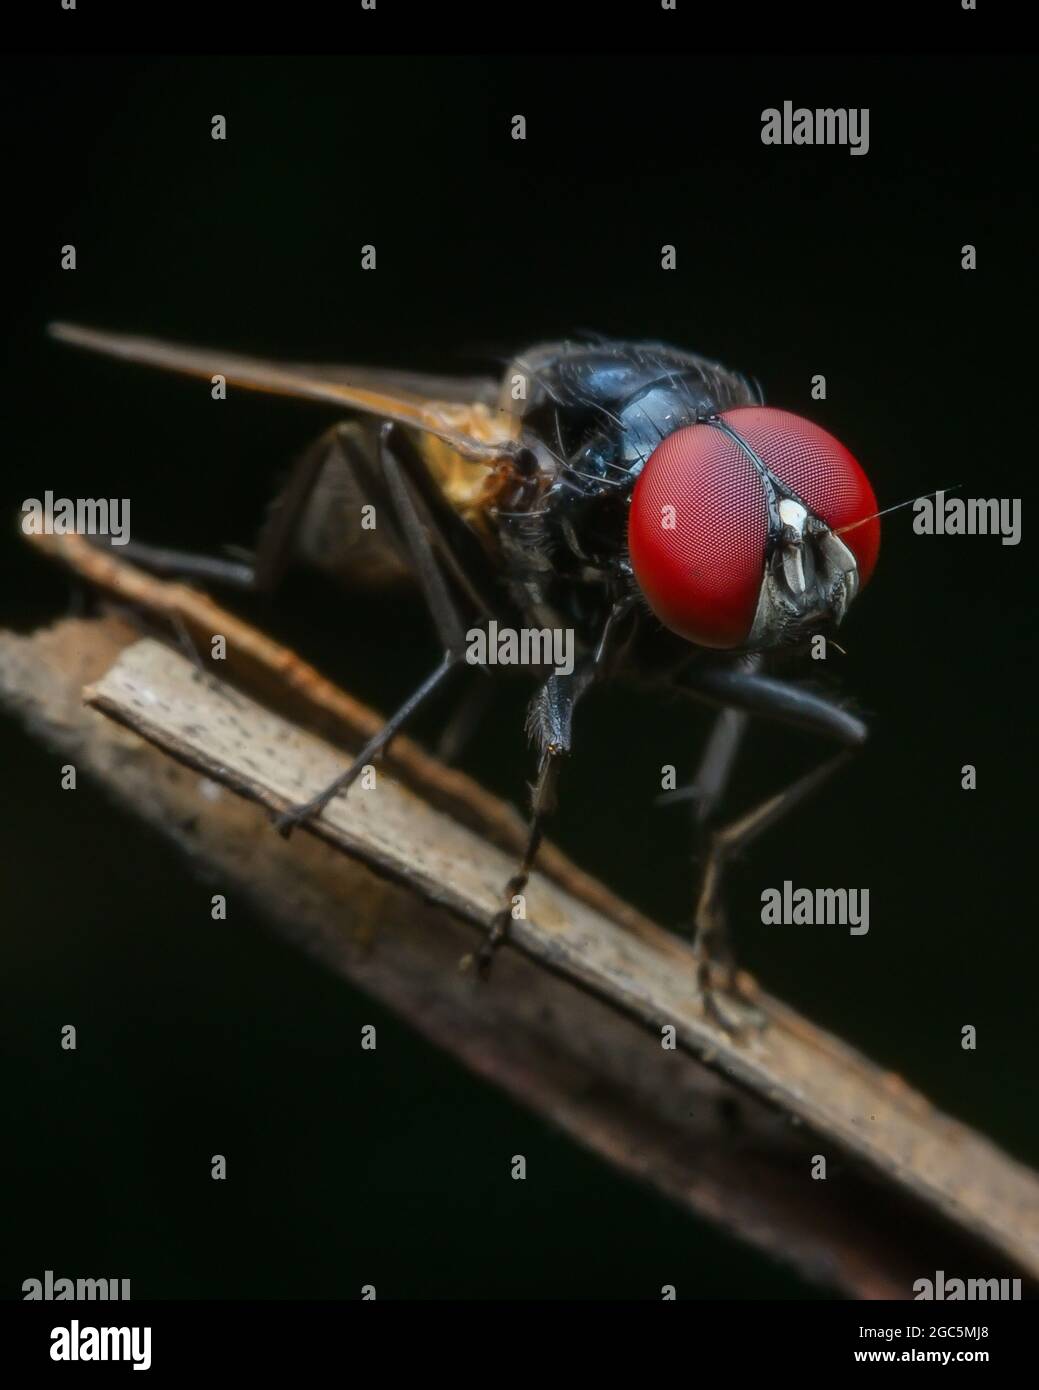 Red compound eye Stock Photo